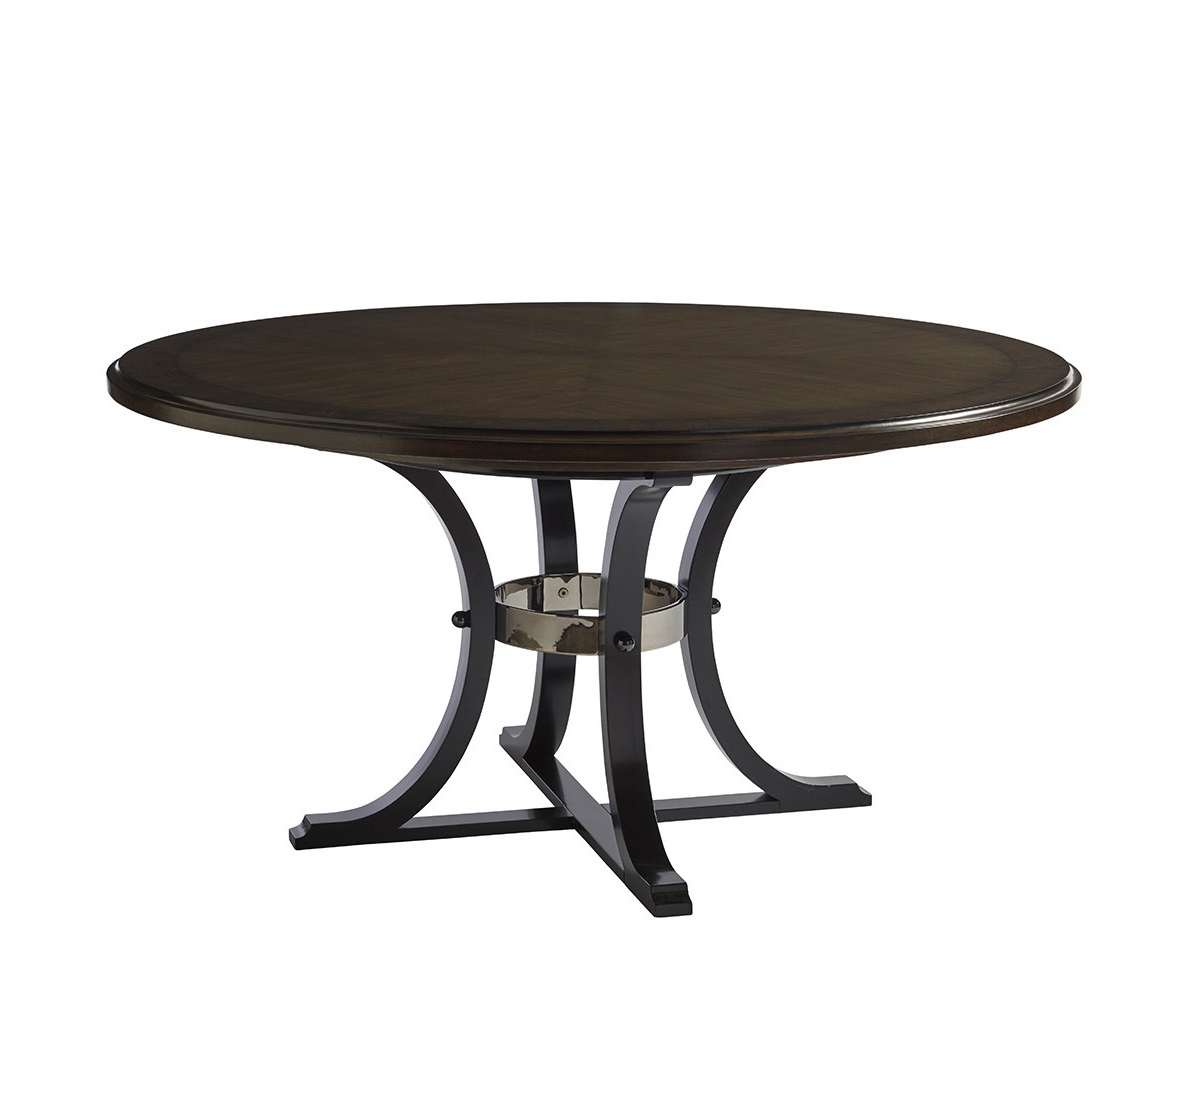 Layton Dining Table, Lexington Round Dining Tables For Sale, Brooklyn, New York 